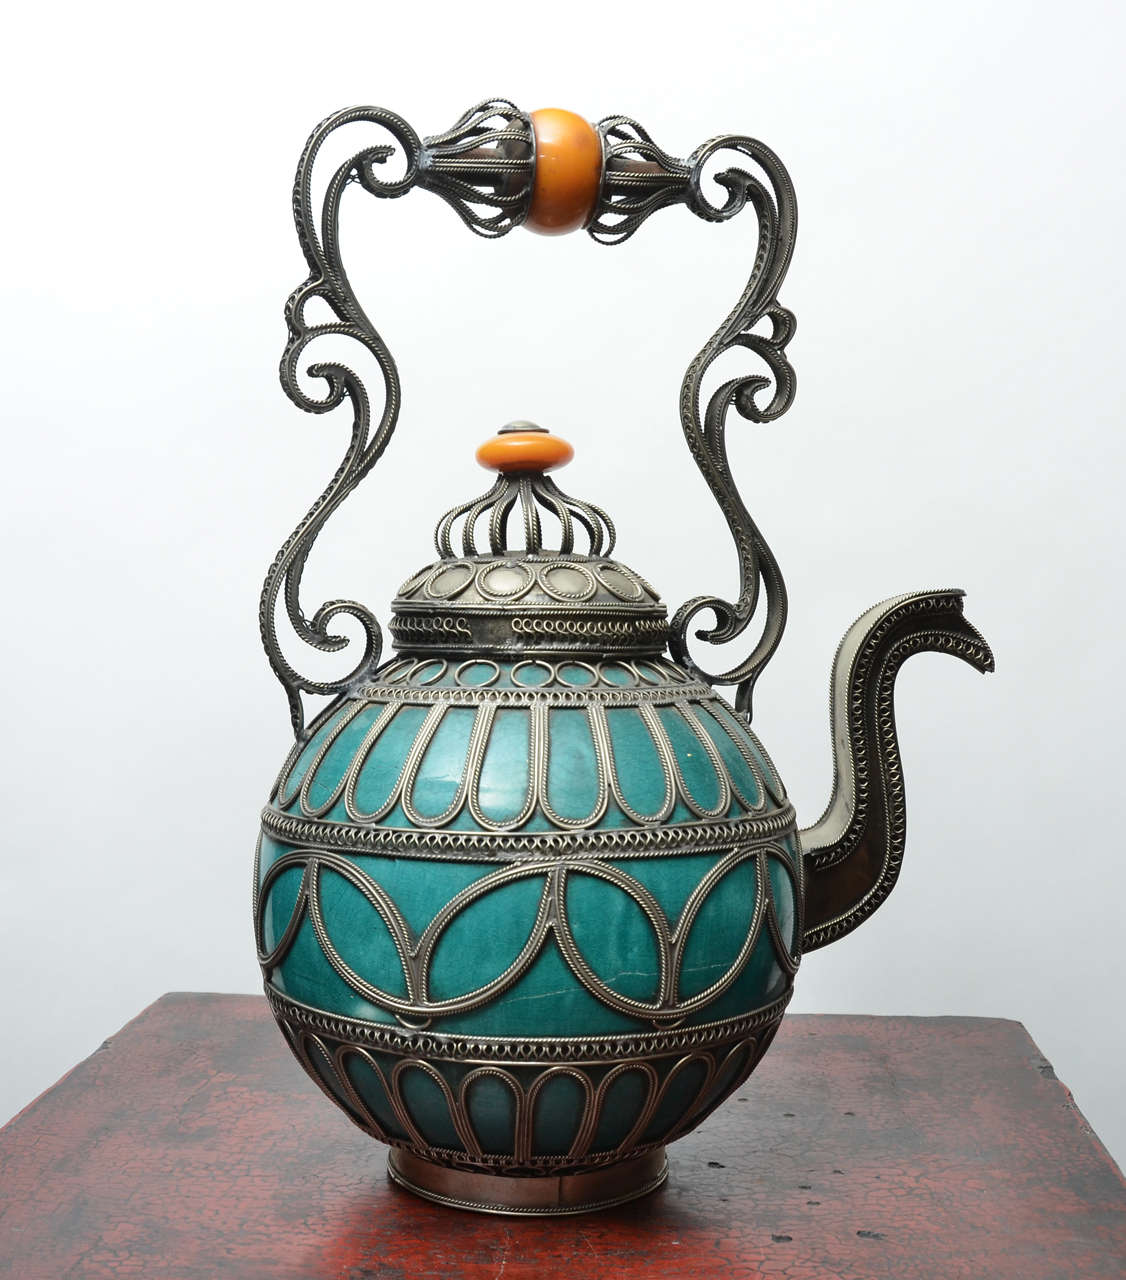 Early 20thC. Turkish Ceramic Teapot with Burnished Silver Overlay